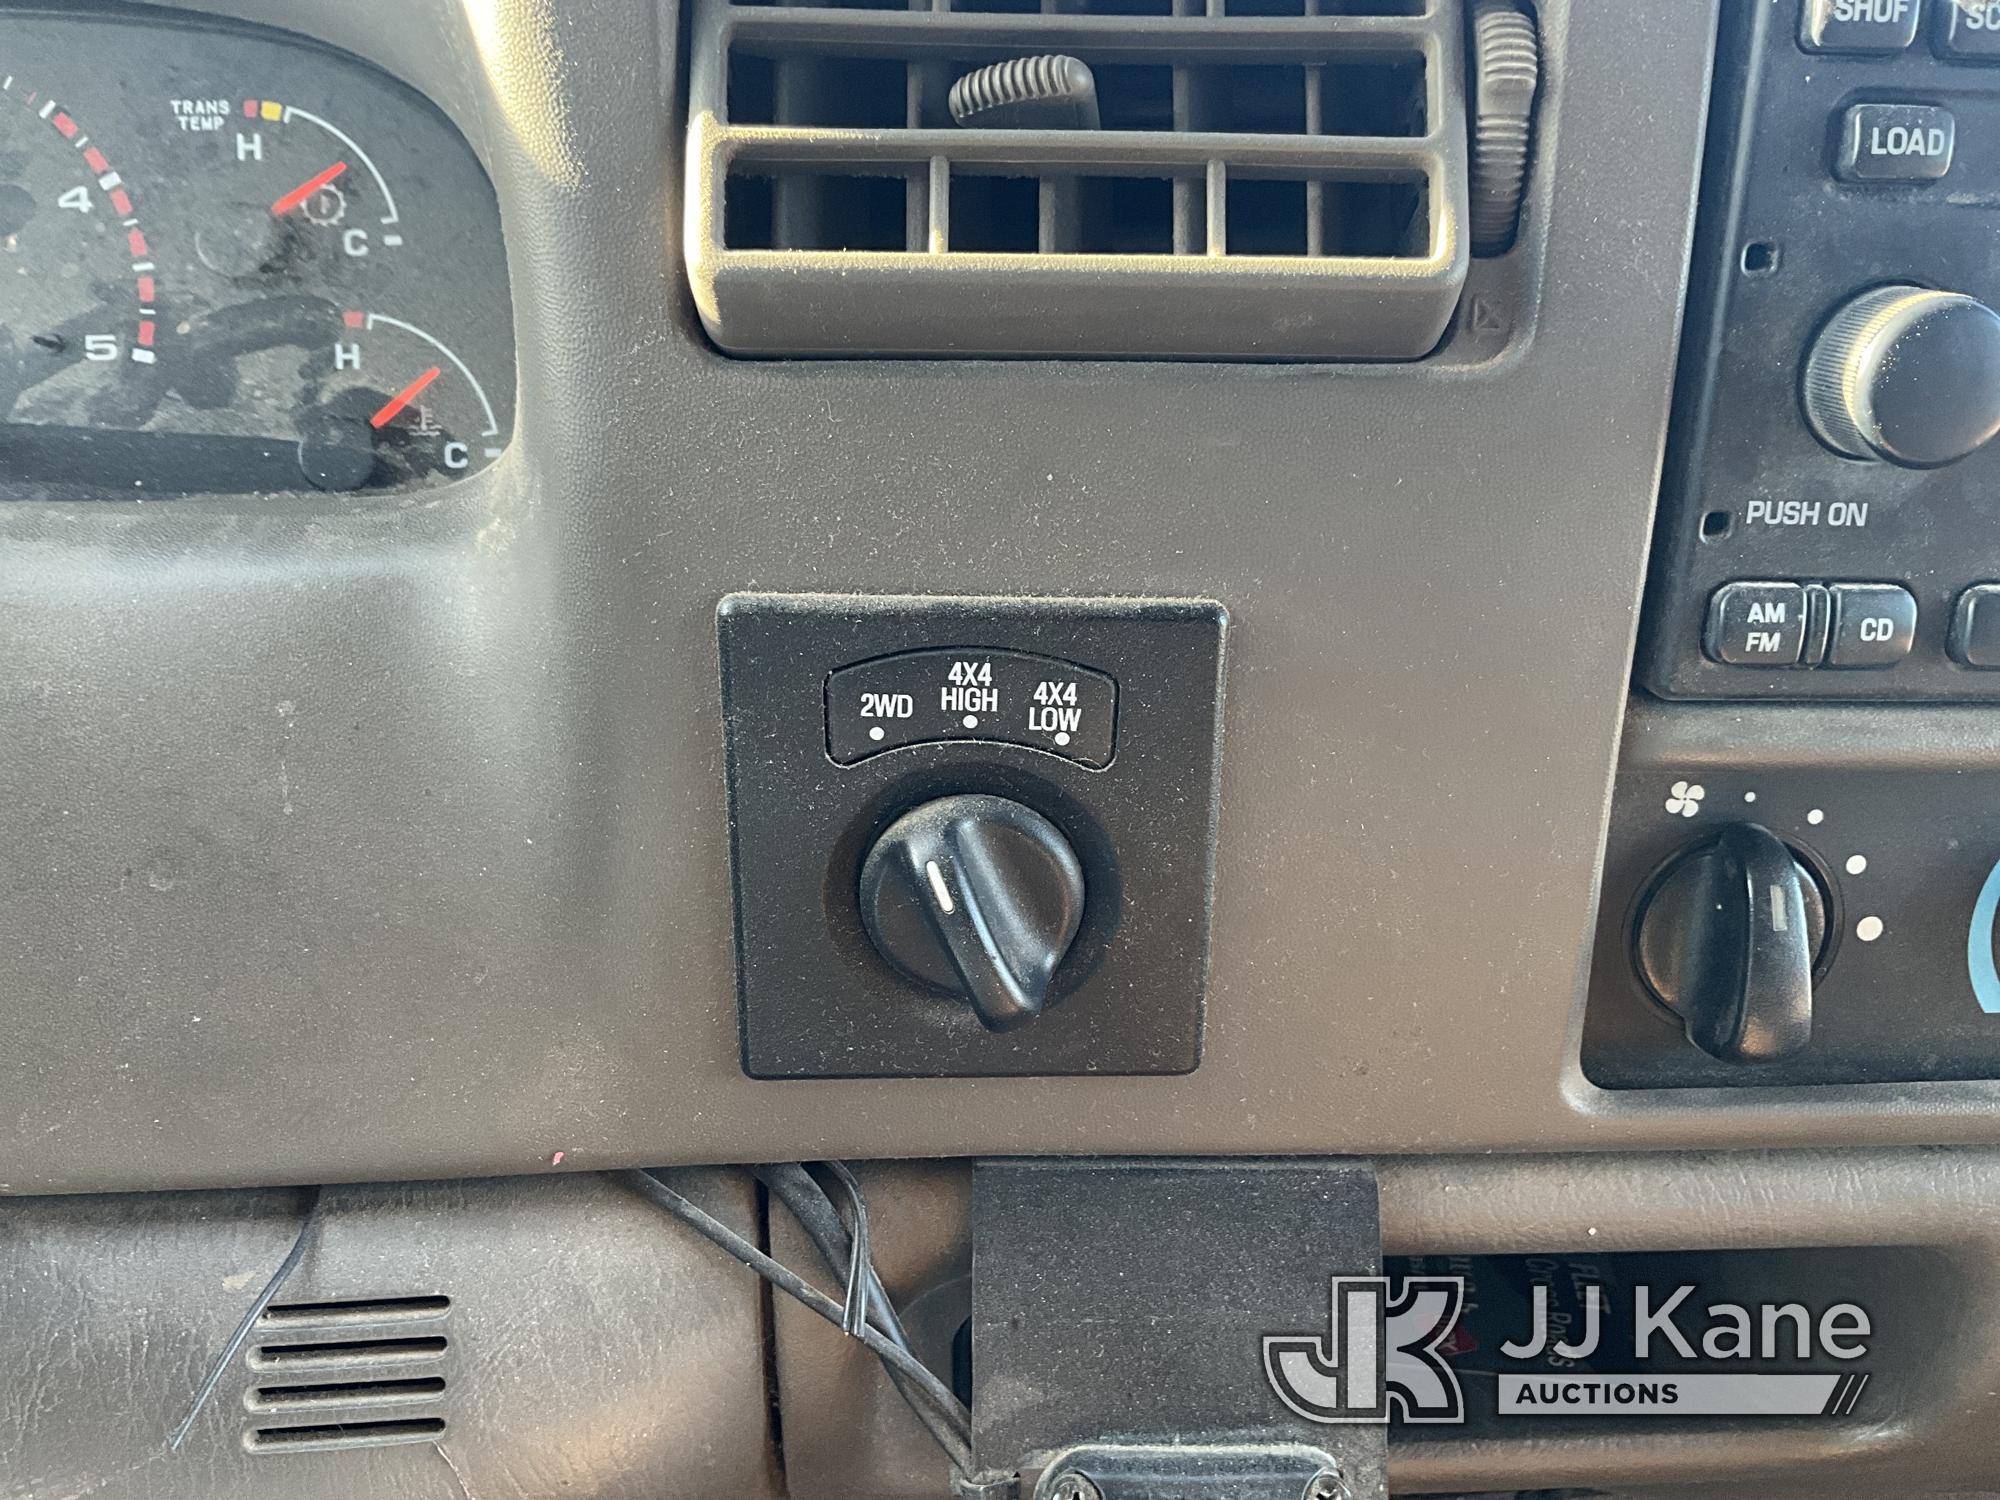 (San Angelo, TX) 2002 Ford F250 4x4 Crew-Cab Pickup Truck Runs and Moves) (Chipped Windshield